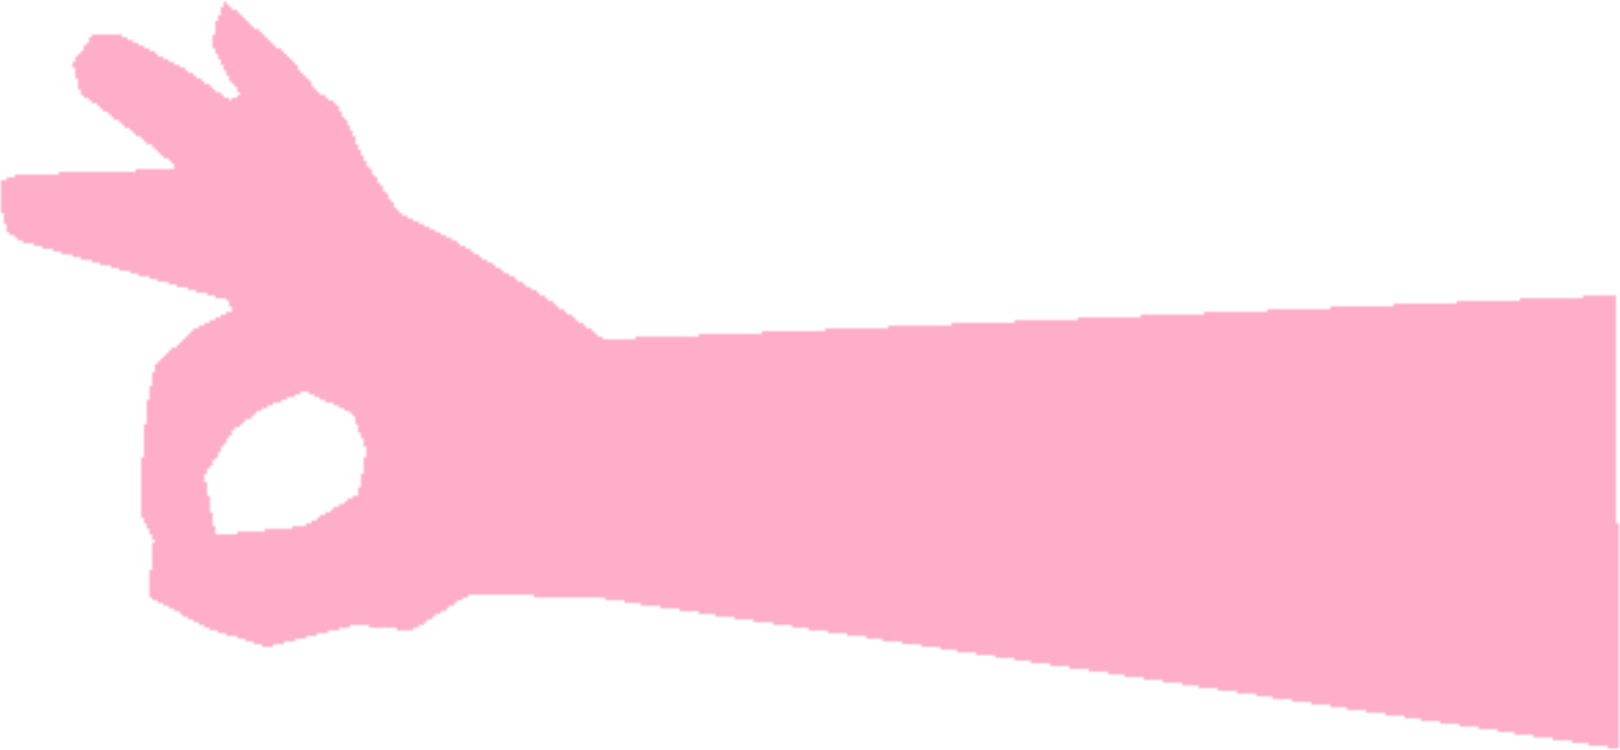 Pink,Silhouette,Thumb